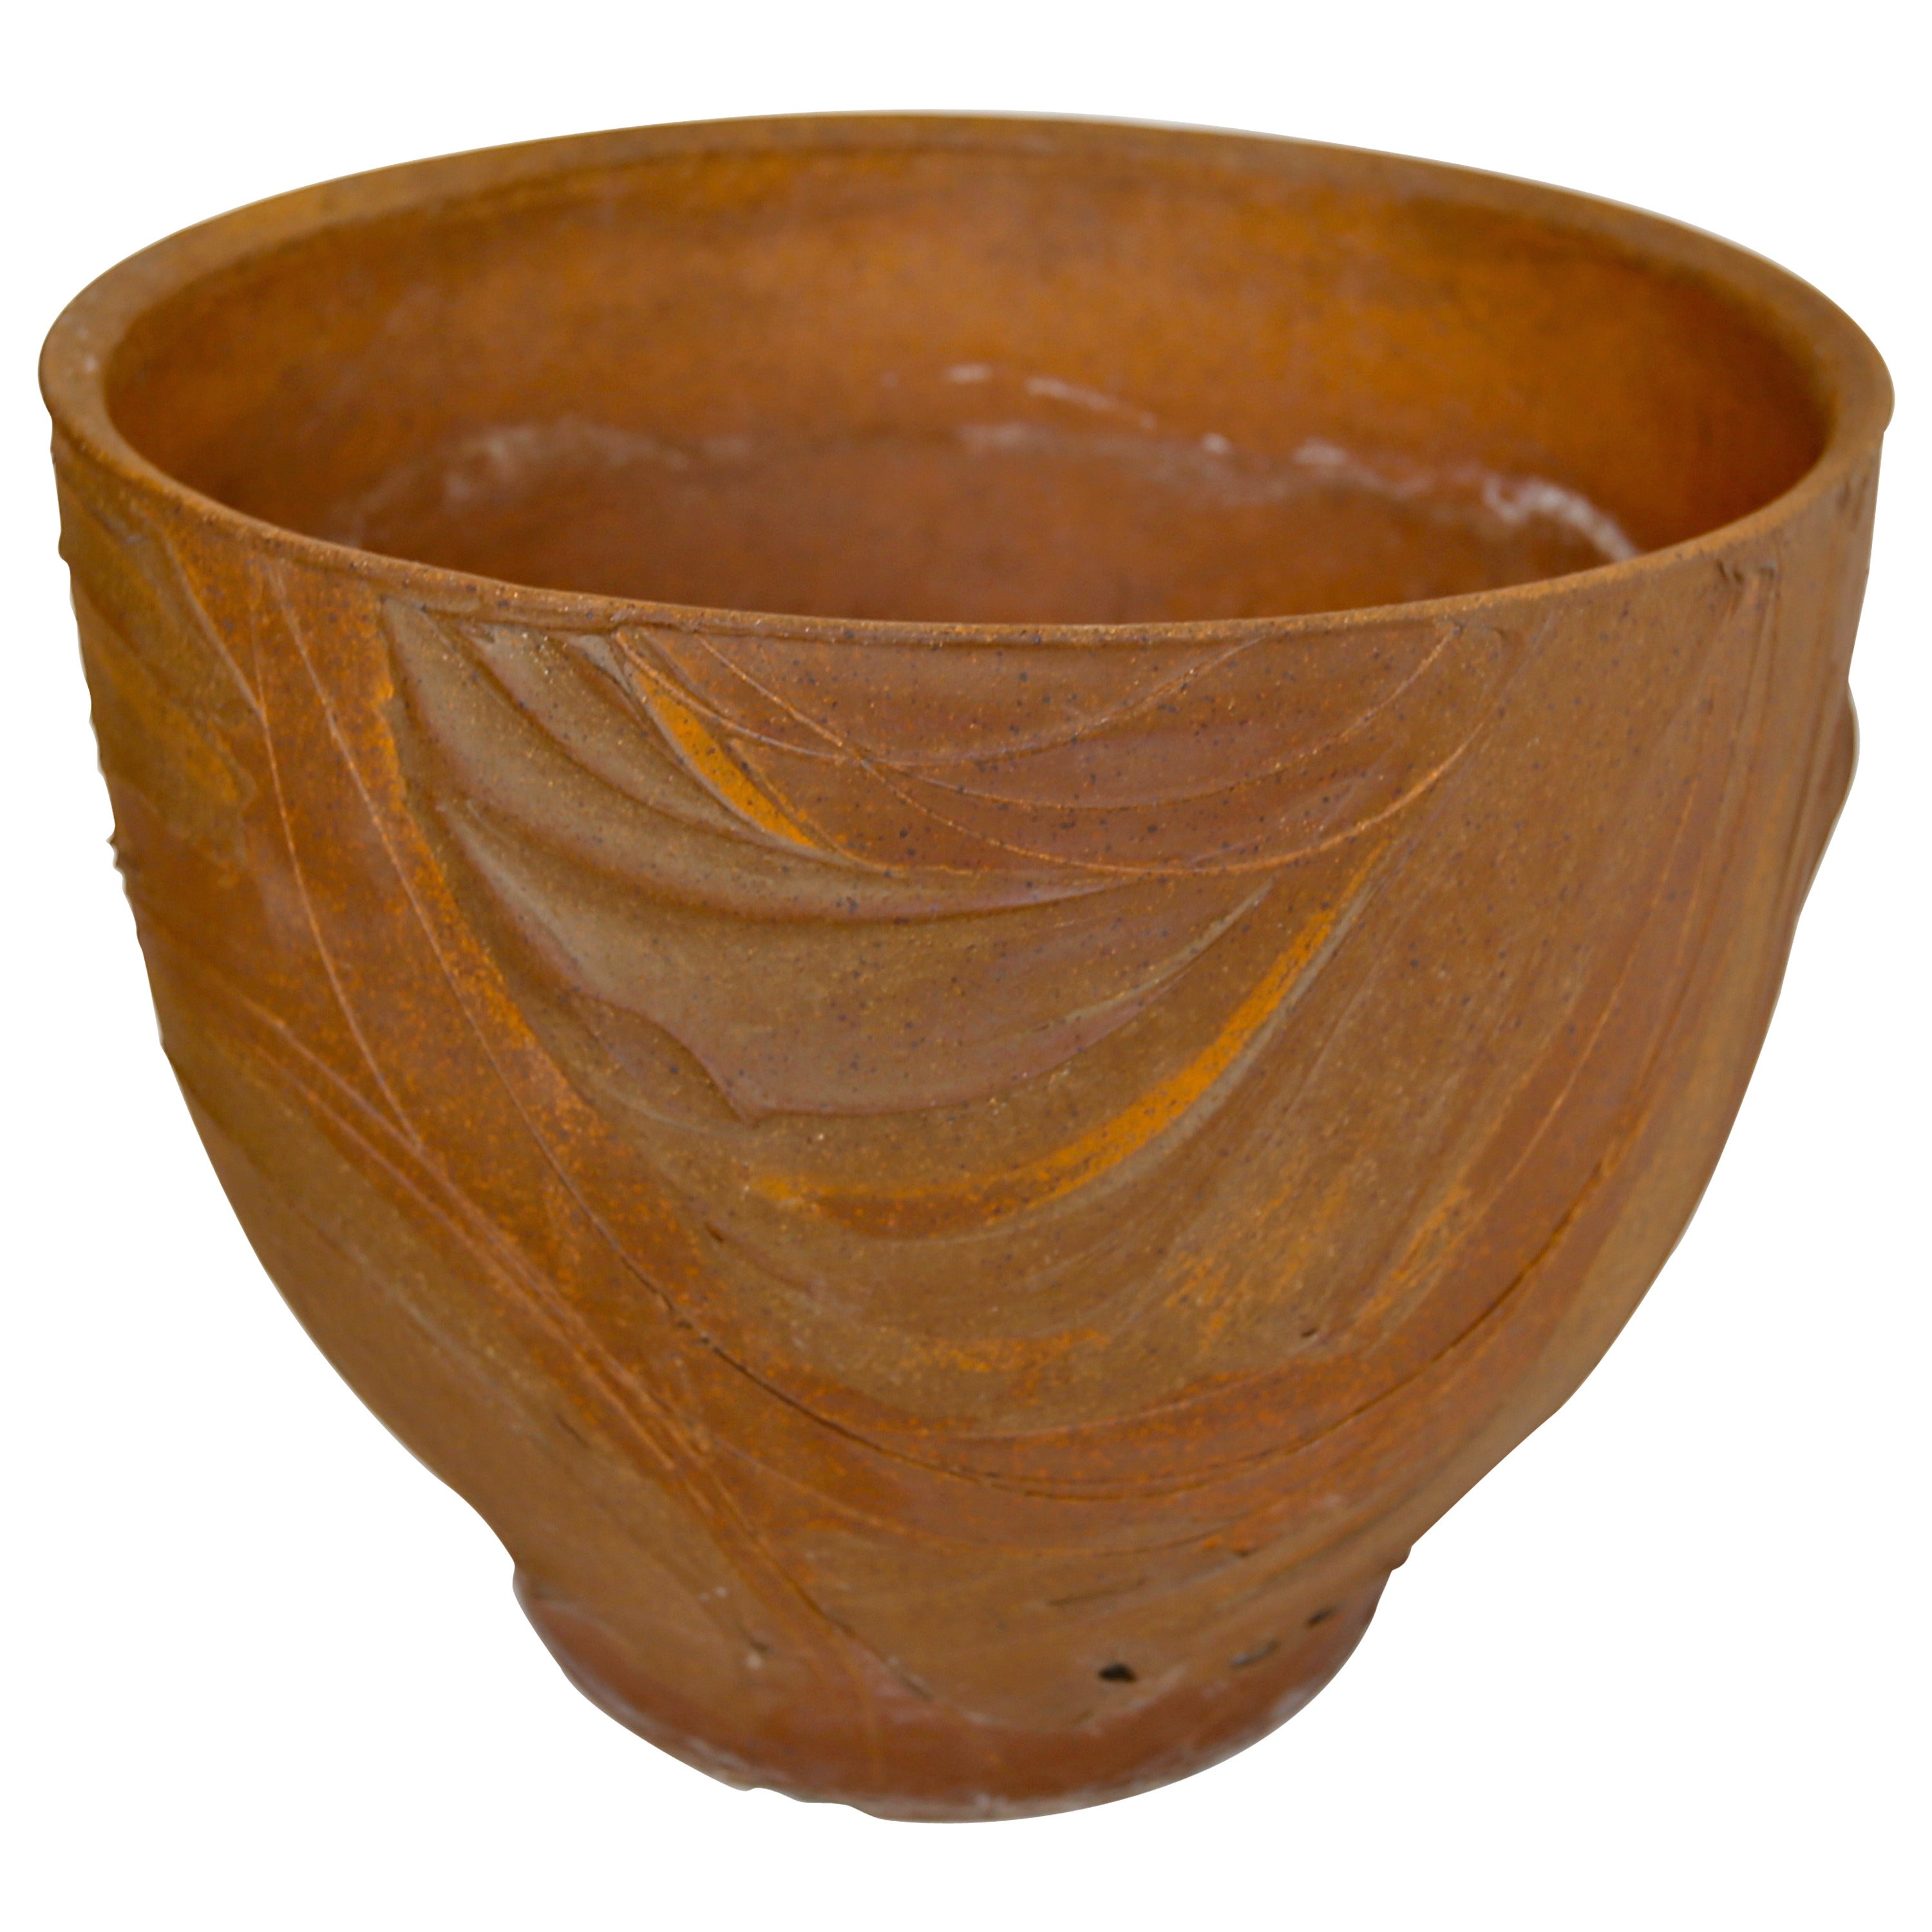 Stoneware Vessel by David Cressey for Architectural Pottery